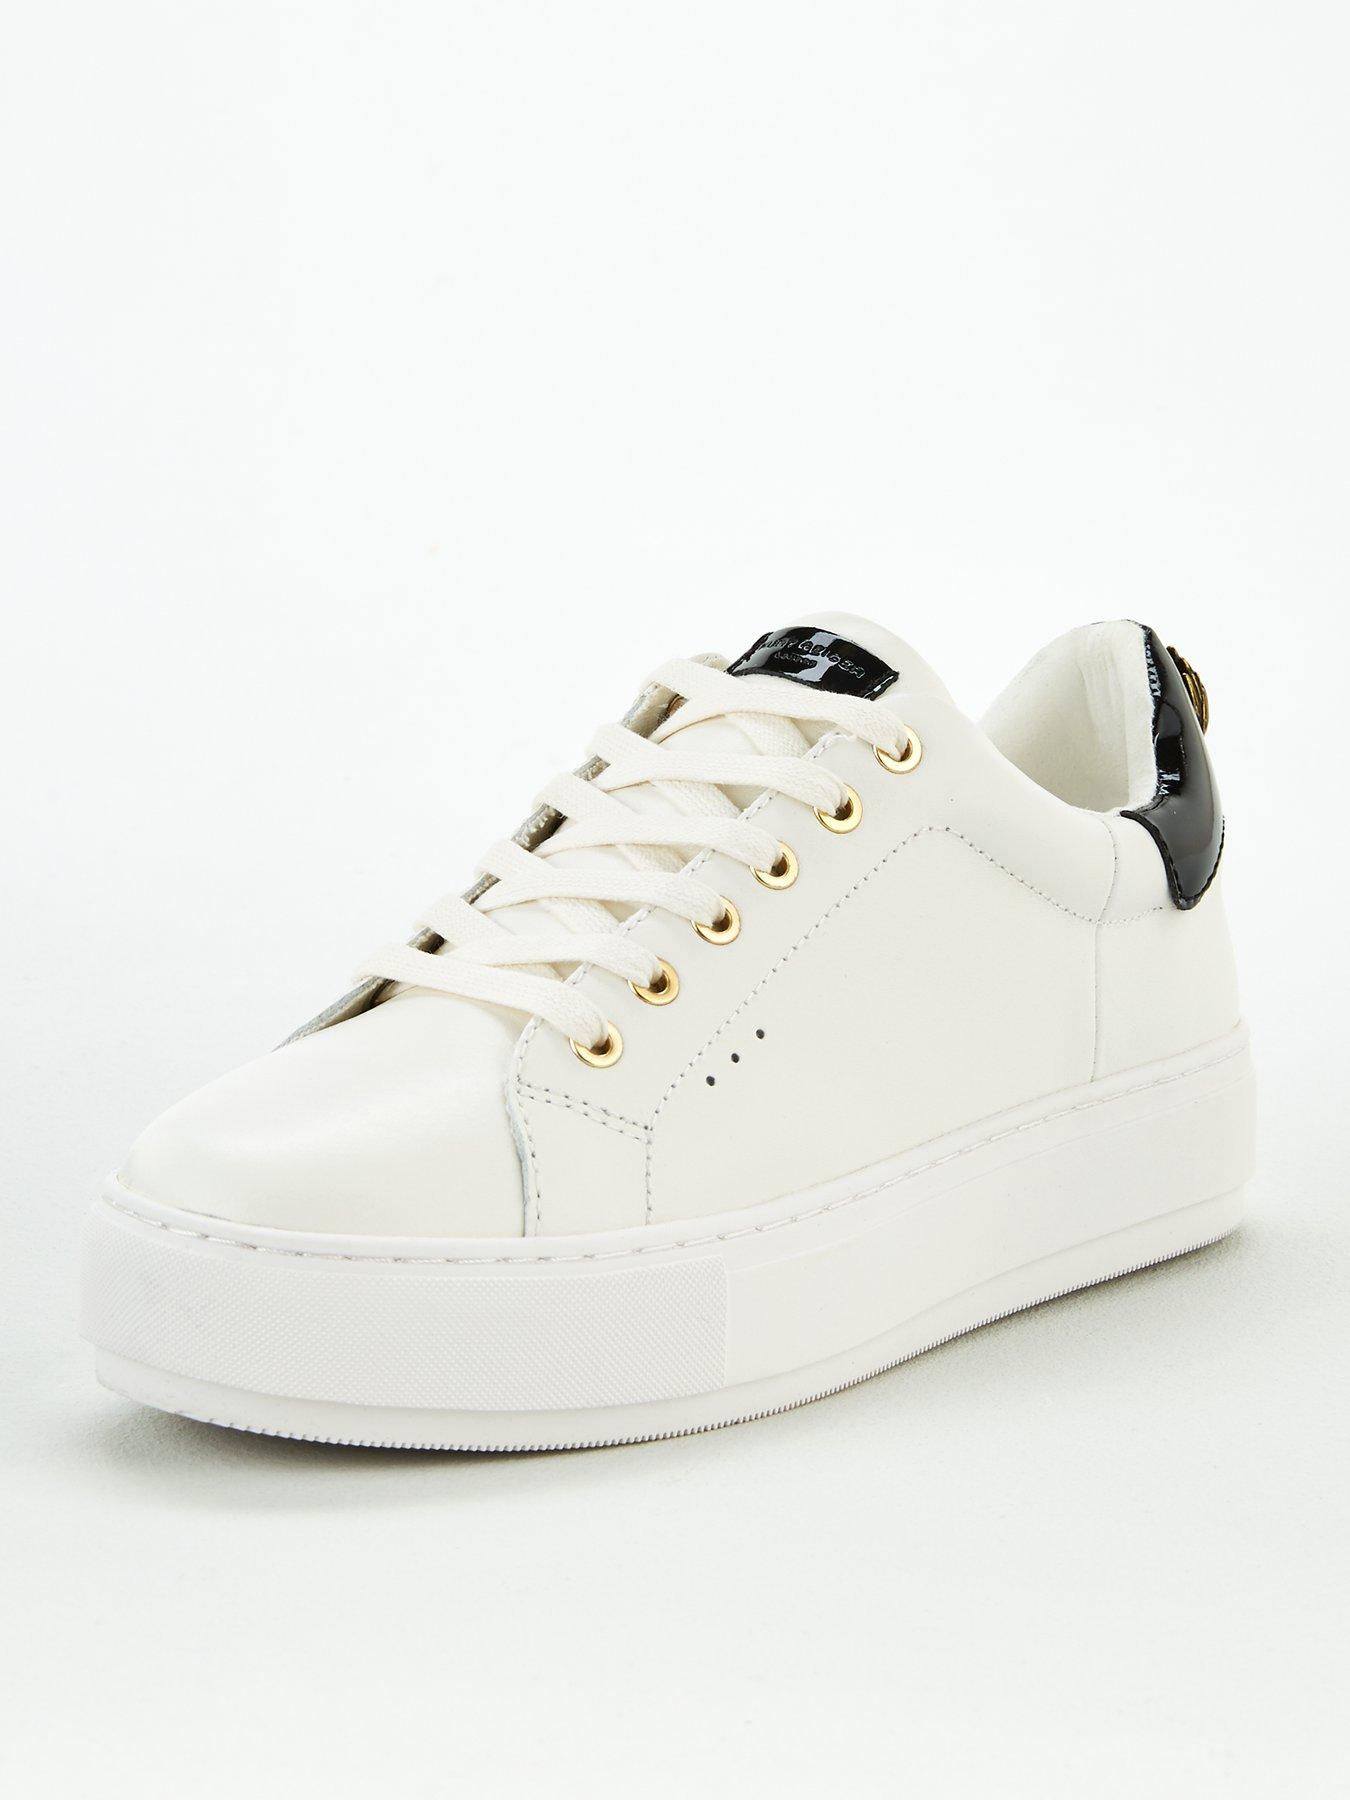 kurt geiger black and gold trainers